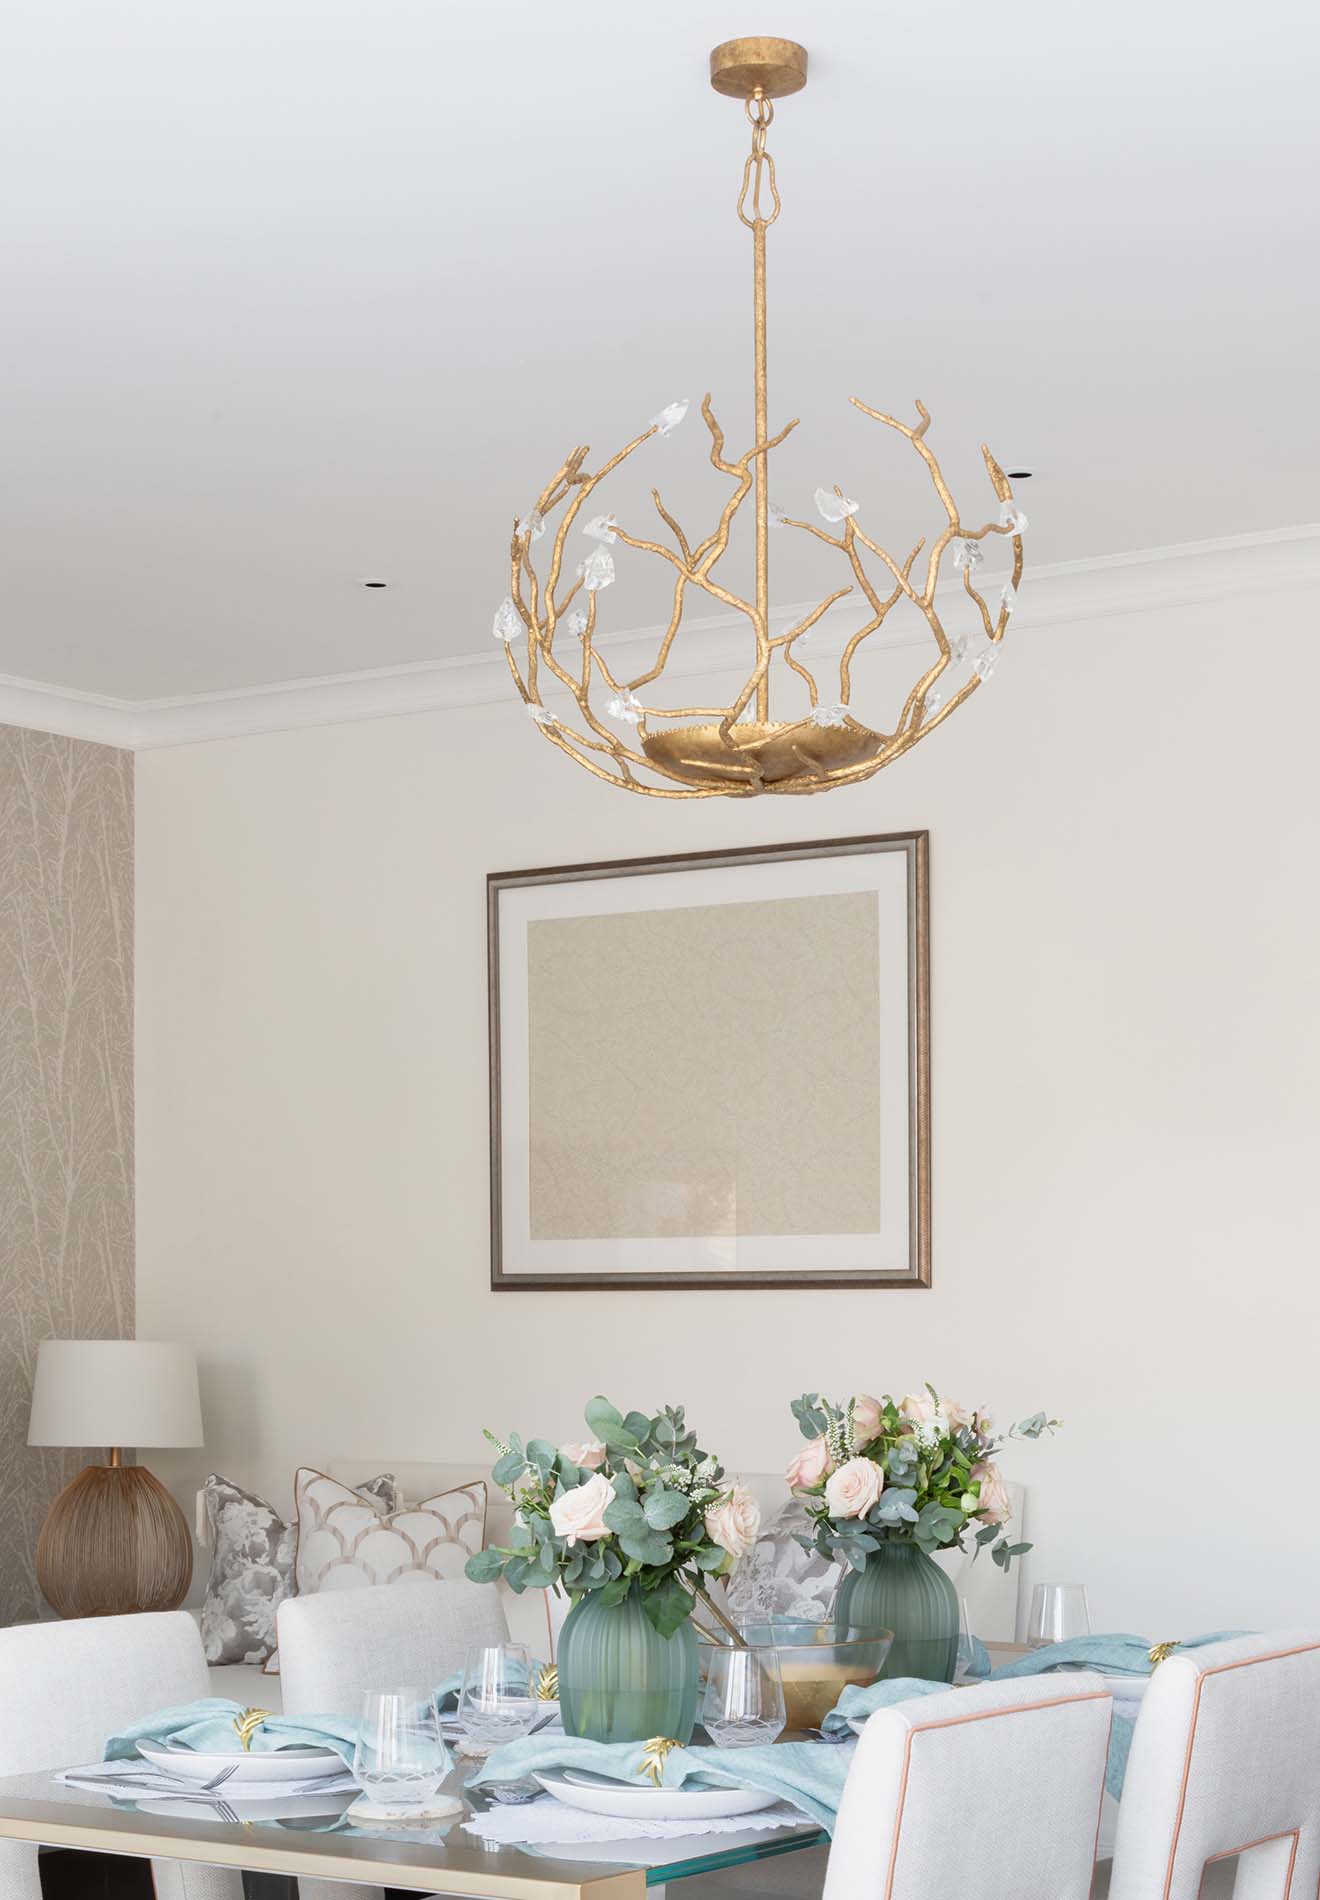 Porta Romana Blossom ceiling light featured in Wells and Maguire's Interior, photography by Paul Craig